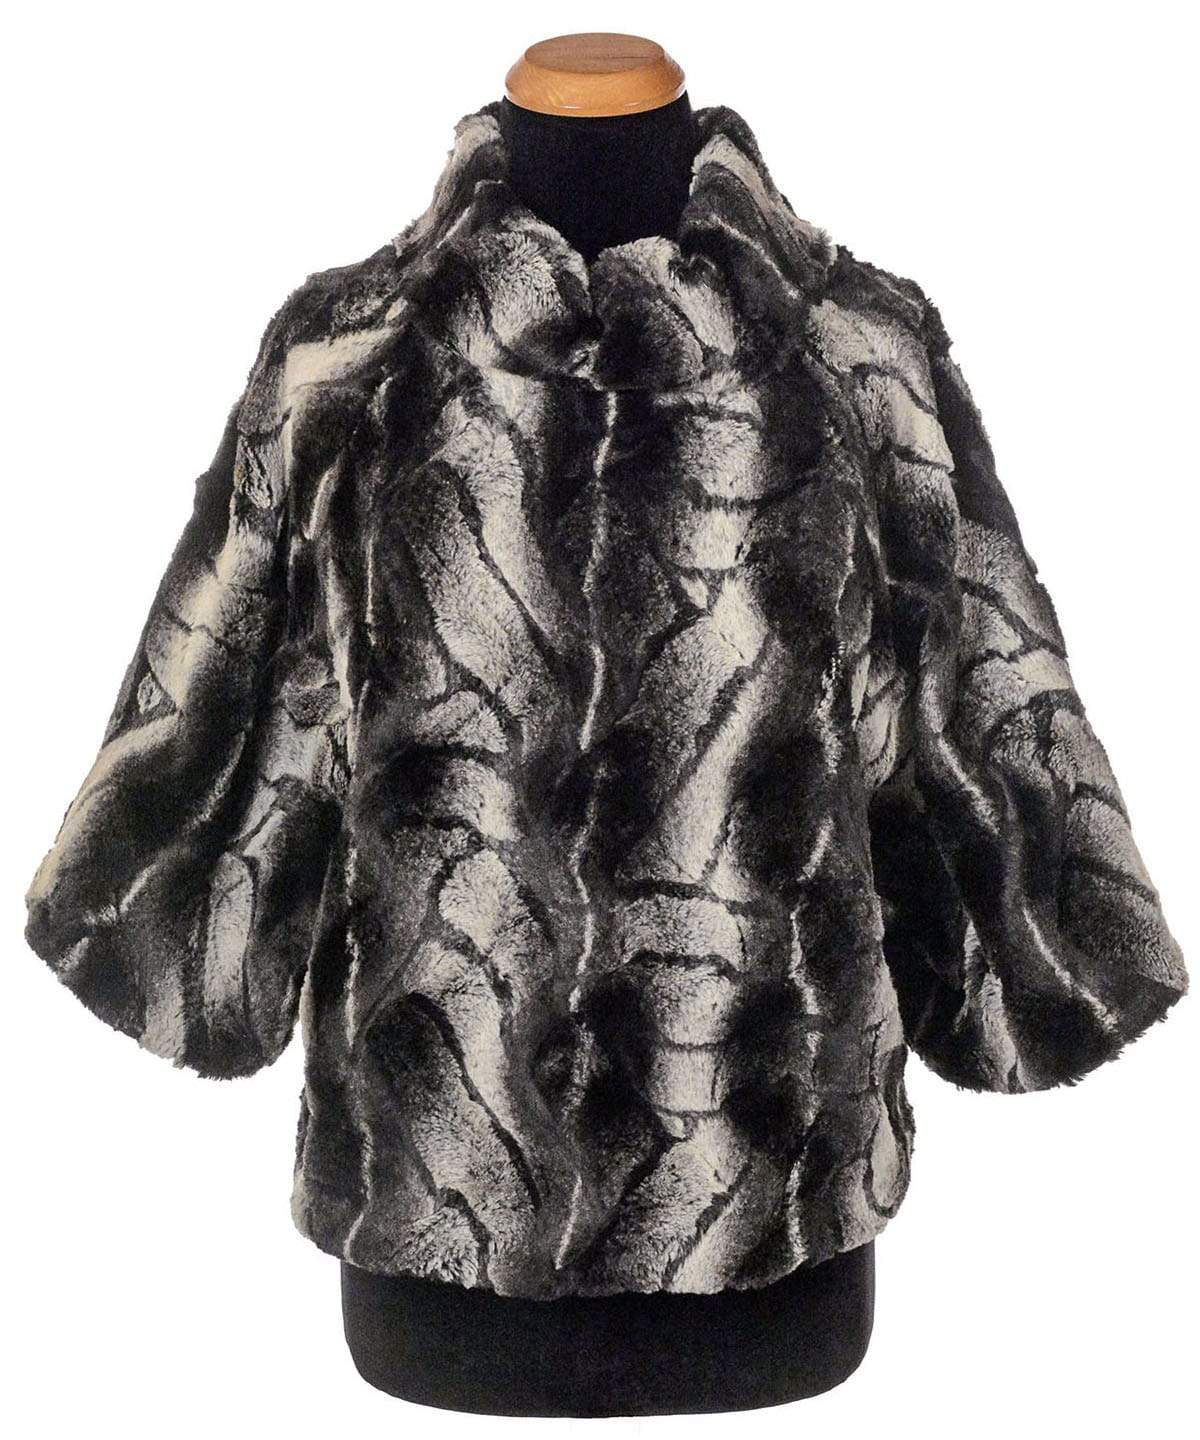 Sweater Top - Luxury Faux Fur in Honey Badger  - Sold Out!